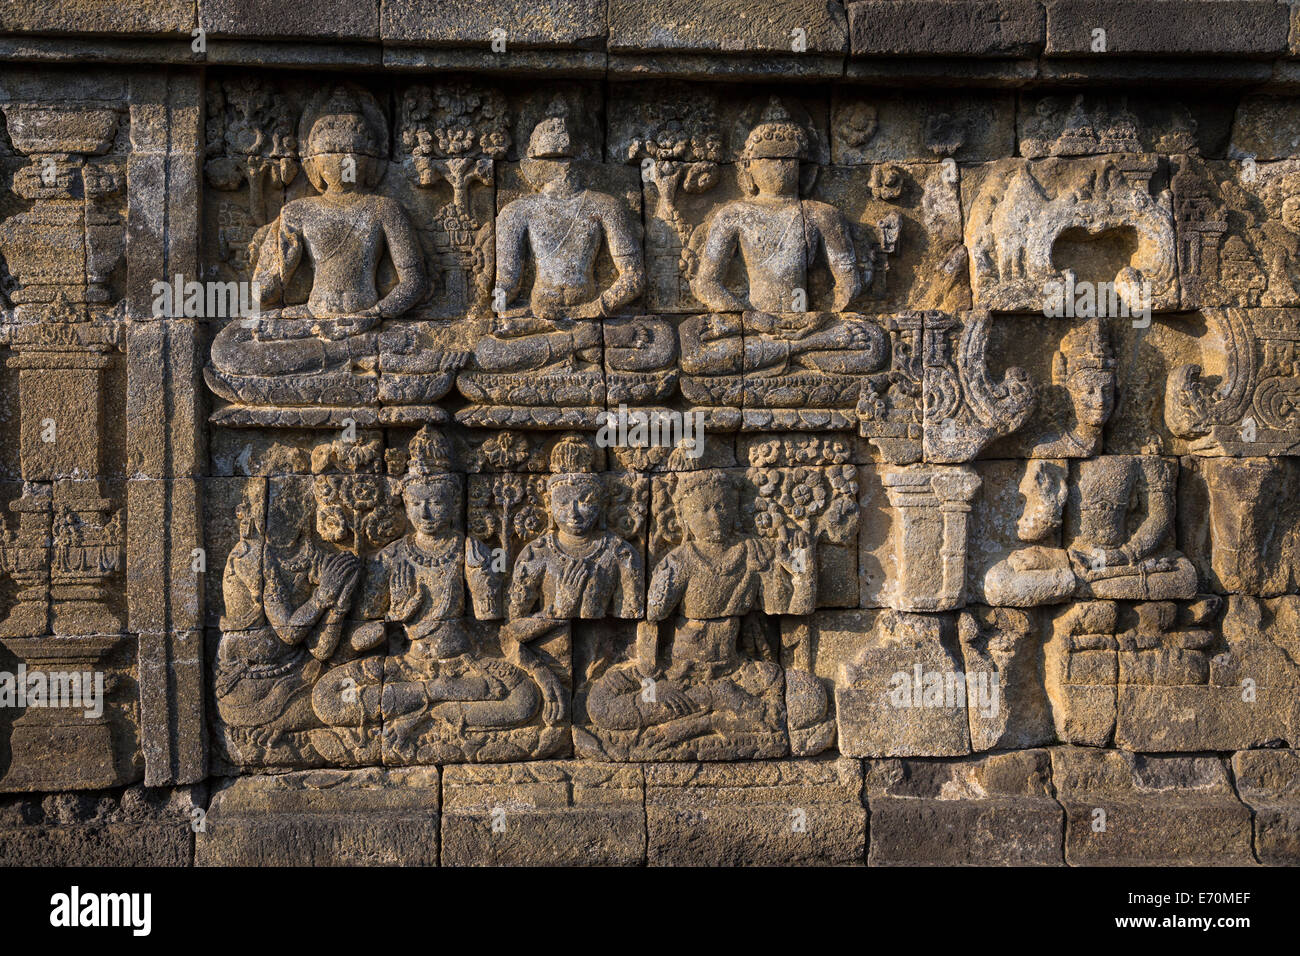 Borobudur, Java, Indonesia. Bas-relief Stone Carving, North Face. Scenes  from the Buddha's Life Show him Seeking Enlightenment Stock Photo - Alamy